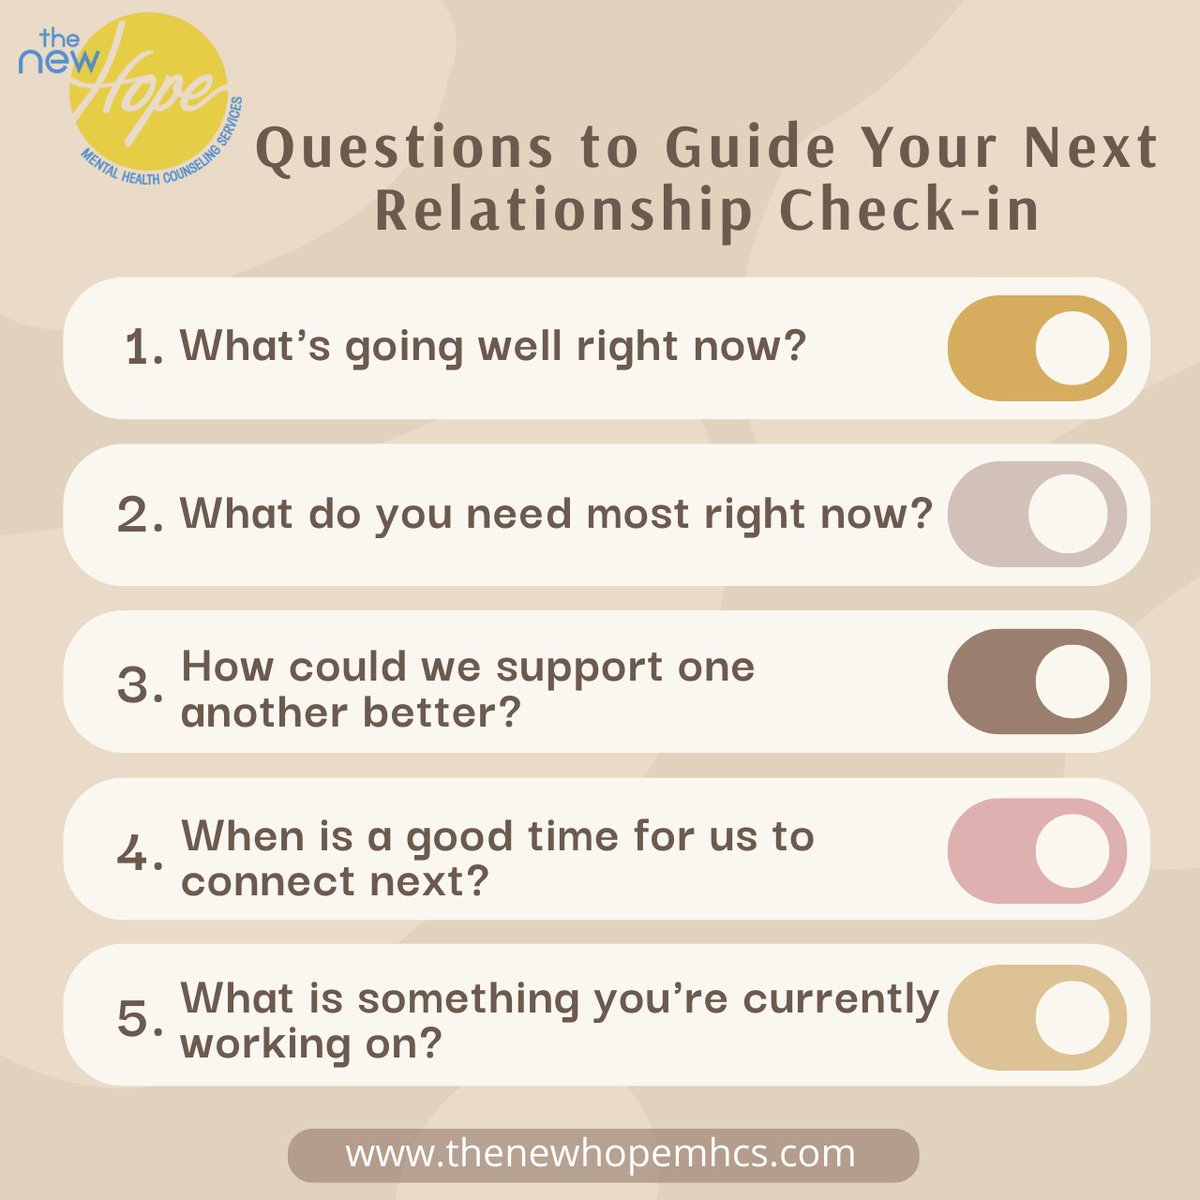 Book your appointment now!(516) 459-2920 

#relationshipcheckin #relationshipwellness #yourbestlife #relationshiptherapy #coupletherapy #relationshipsuccess # #couplecounseling #relationshipcounseling #Thenewhopemhcs #Mentalhealth